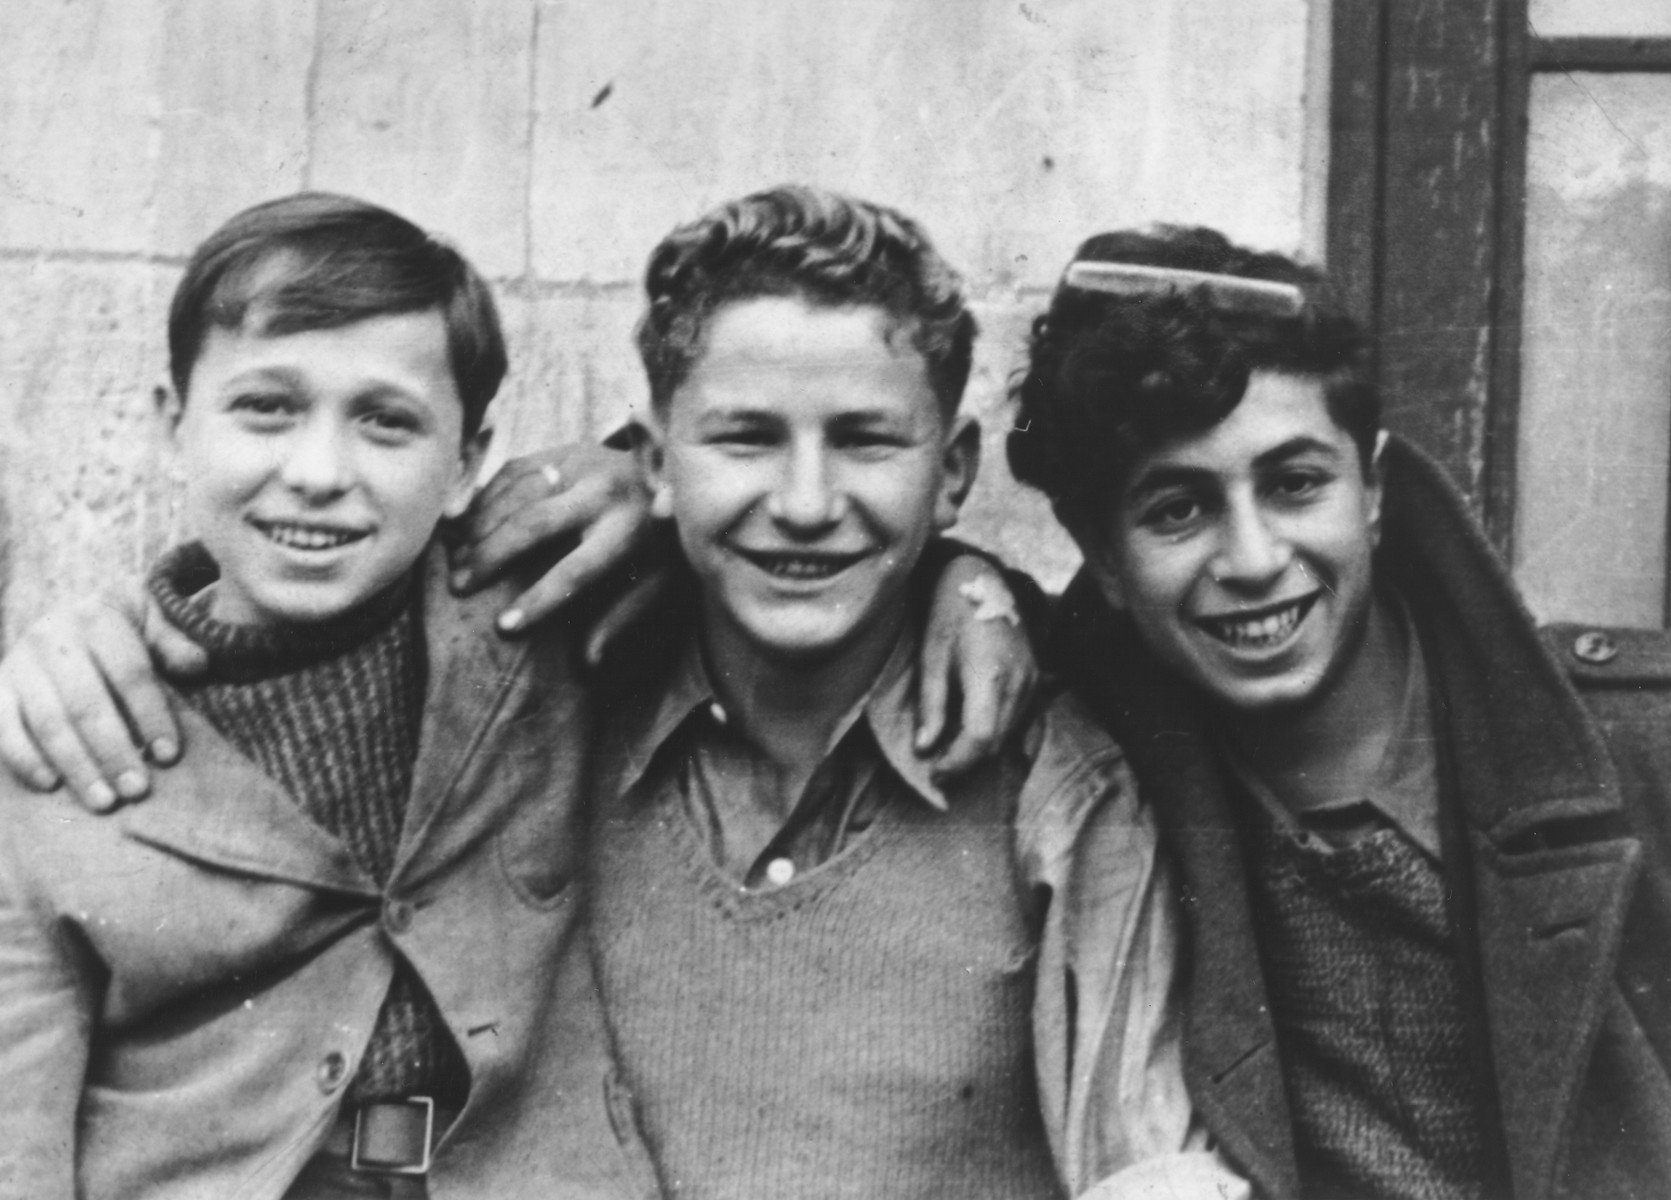 Portrait of three Jewish DP youth at the OSE (Oeuvre de Secours aux Enfants) children's home in Champigny-sur-Marne. 

Pictured from left to right are: Leon Lewkowicz, Johny Weisz and Ignatz Spett.